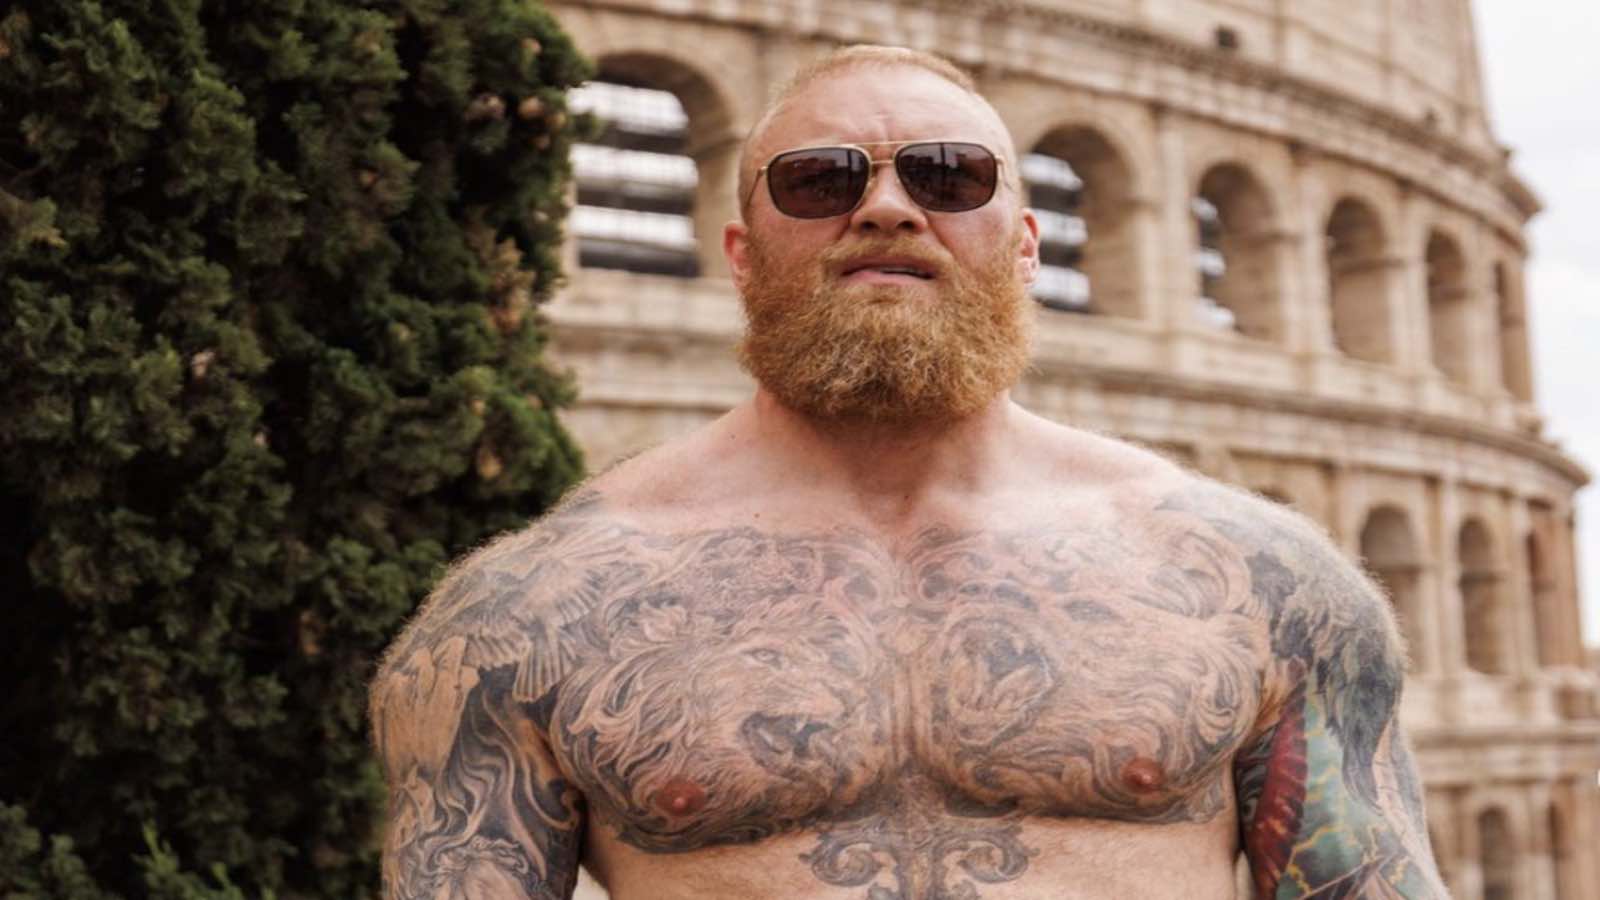 strongman-legend-hafthor-bjornsson-receives-international-sports-hall-of-fame-induction-–-breaking-muscle